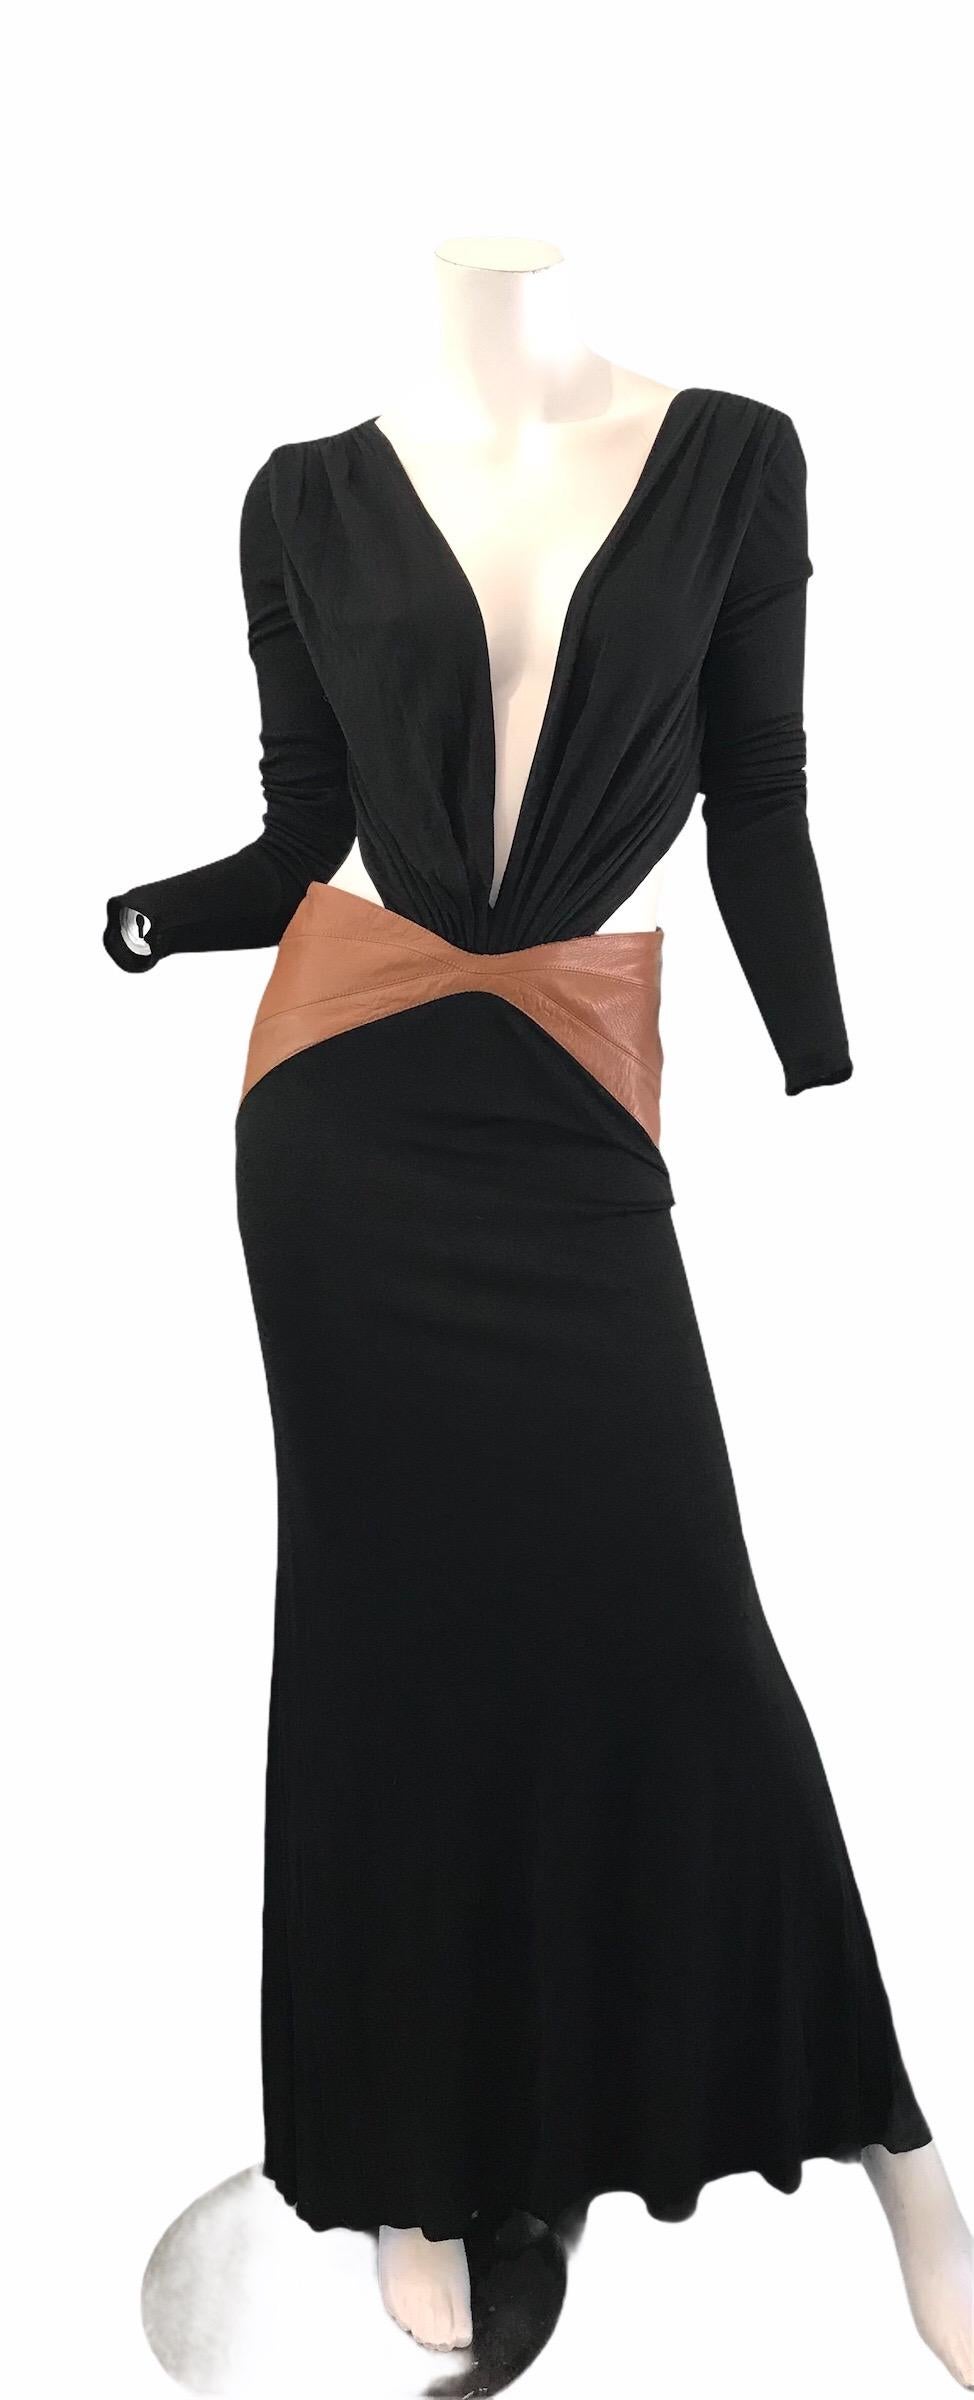 Gianni Versace black jersey gown with brown leather accents. Condition: Very good. Size S/ M 